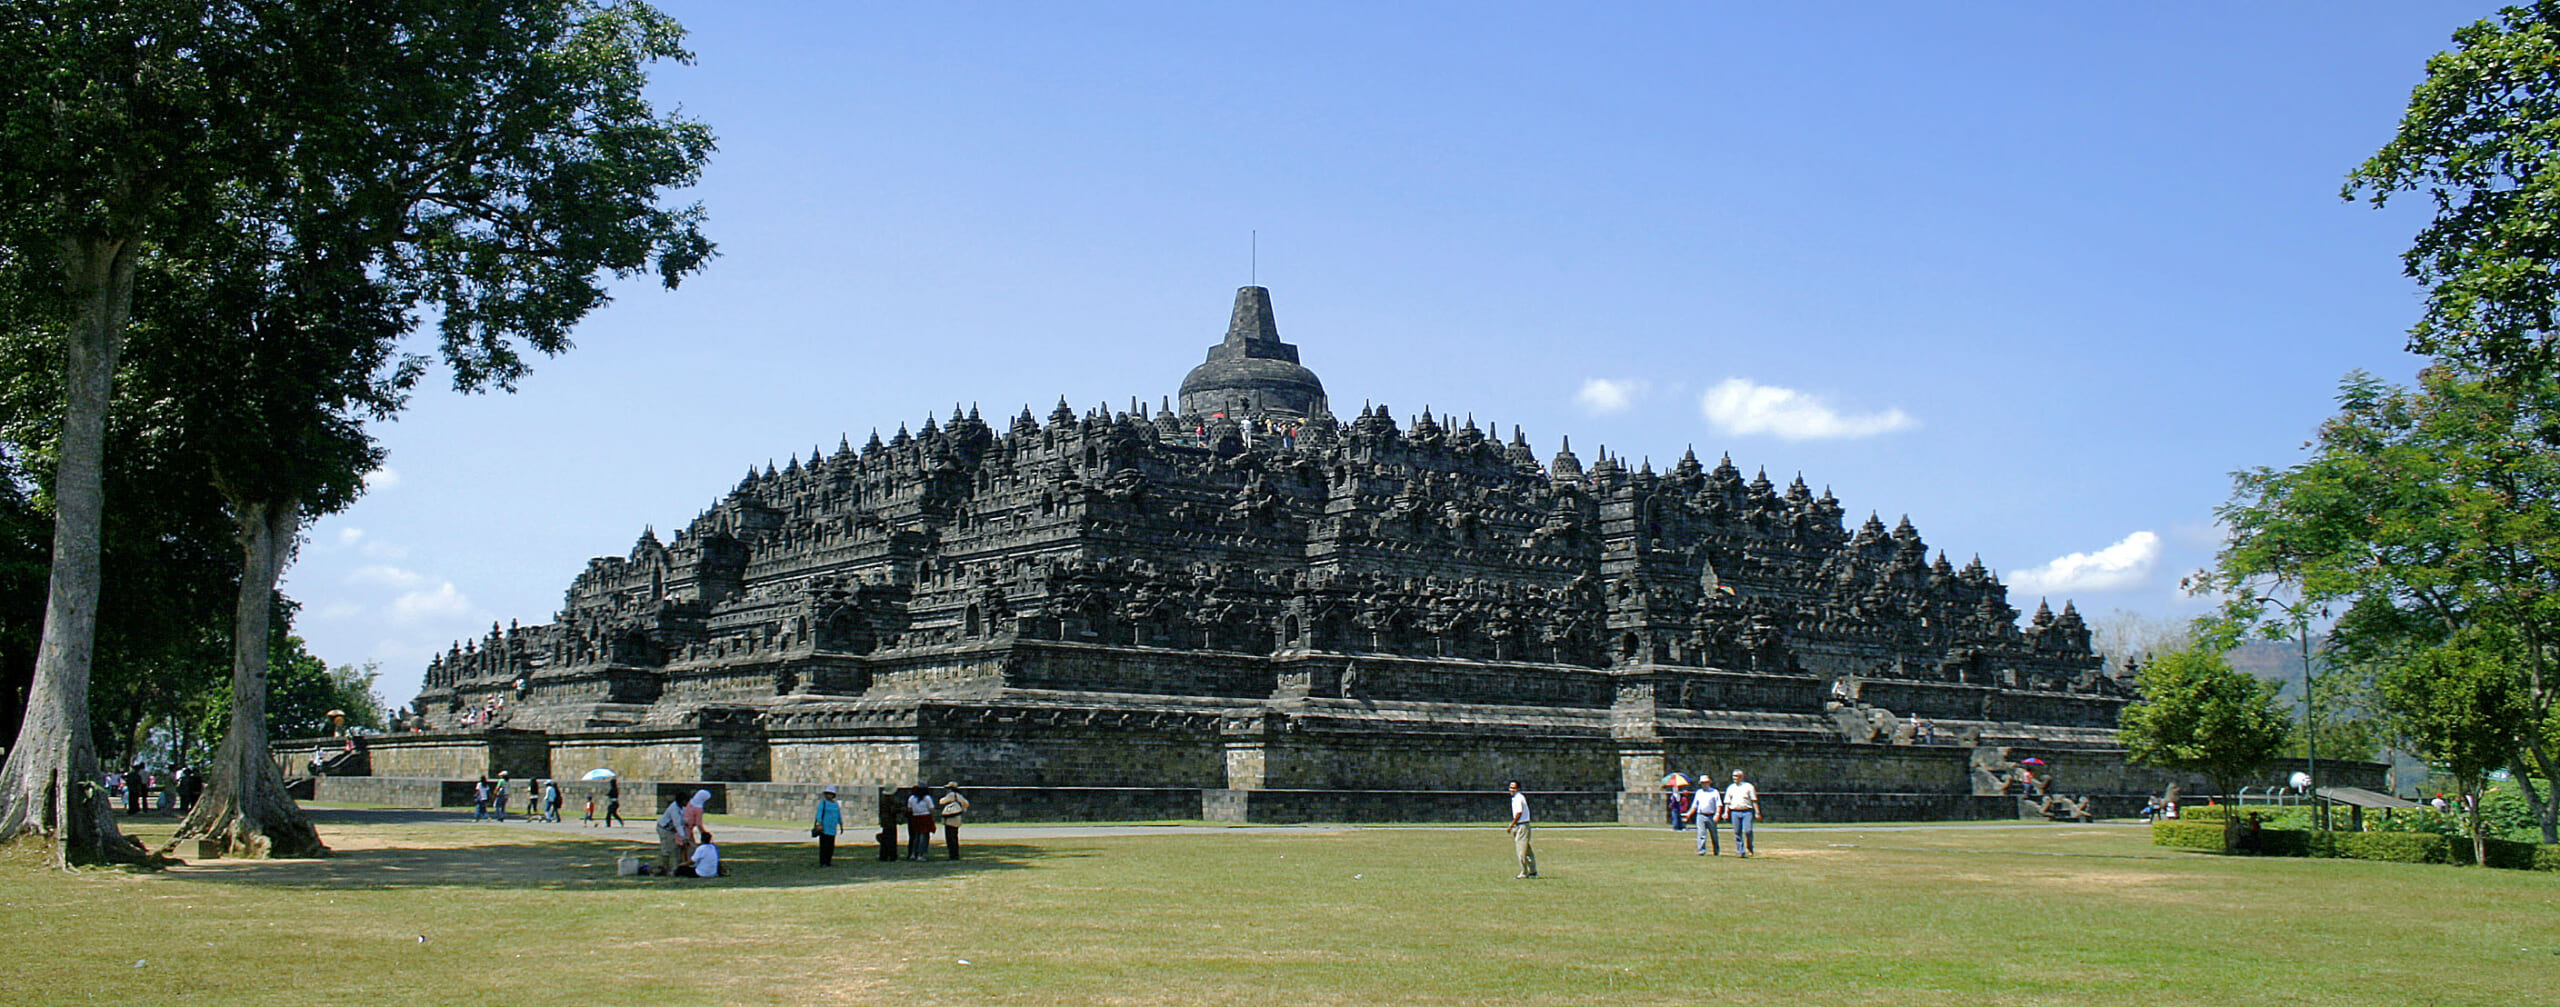 Borobudur in Central Java, the world's largest Buddhist temple, is the single most visited tourist attraction in Indonesia.